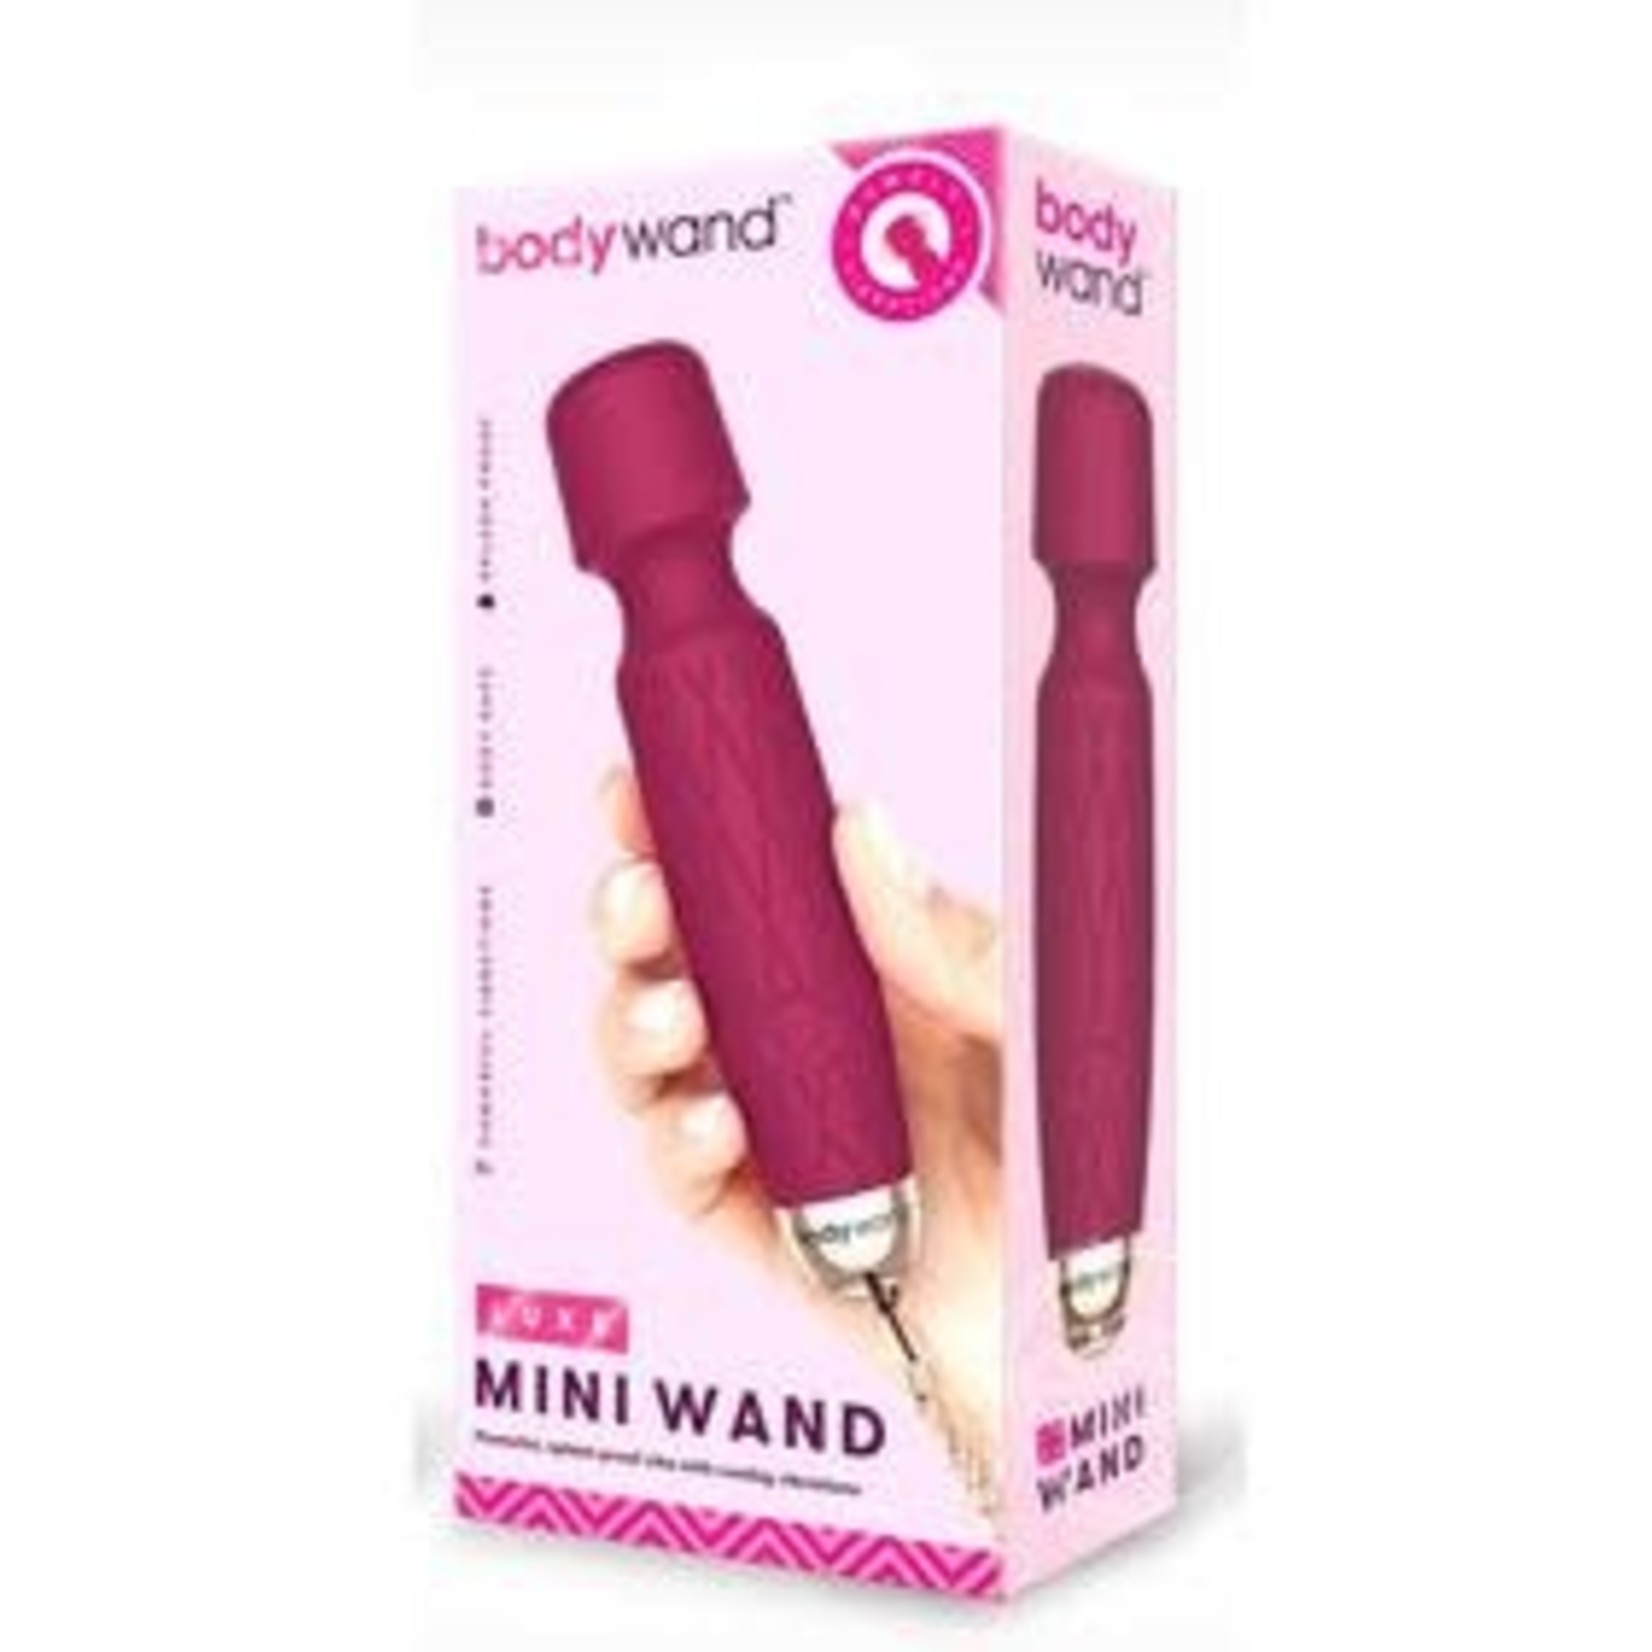 Bodywand Luxe Mini Wand Rechargeable Silicone Wand Massager - Pink